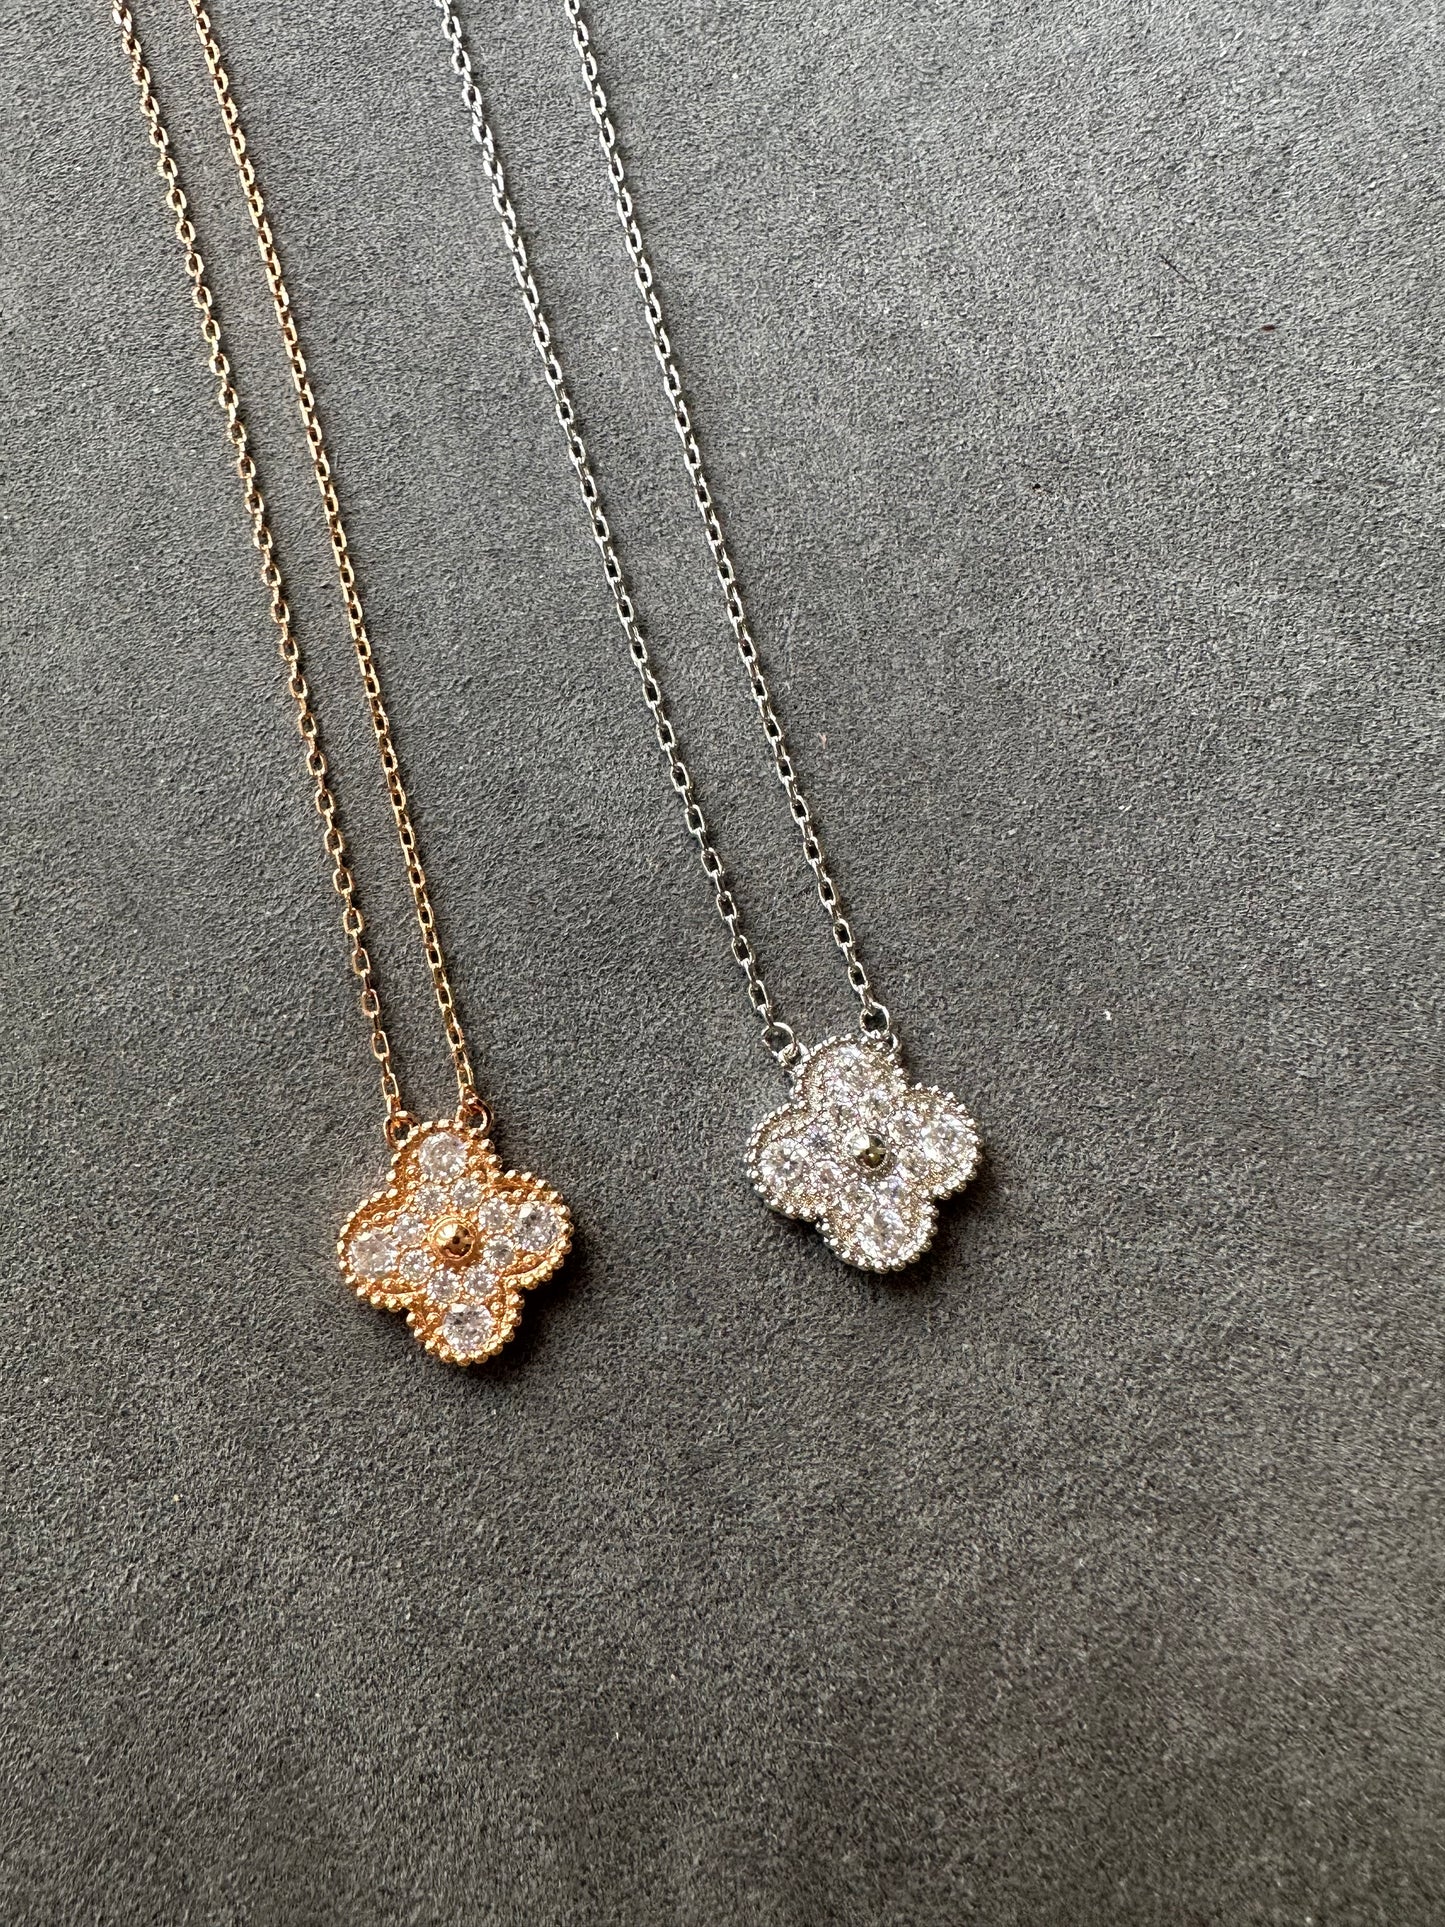 15mm cz Clover Necklace, Gold Plated, 925 Sterling Silver 42cm long - ParadiseKissCo